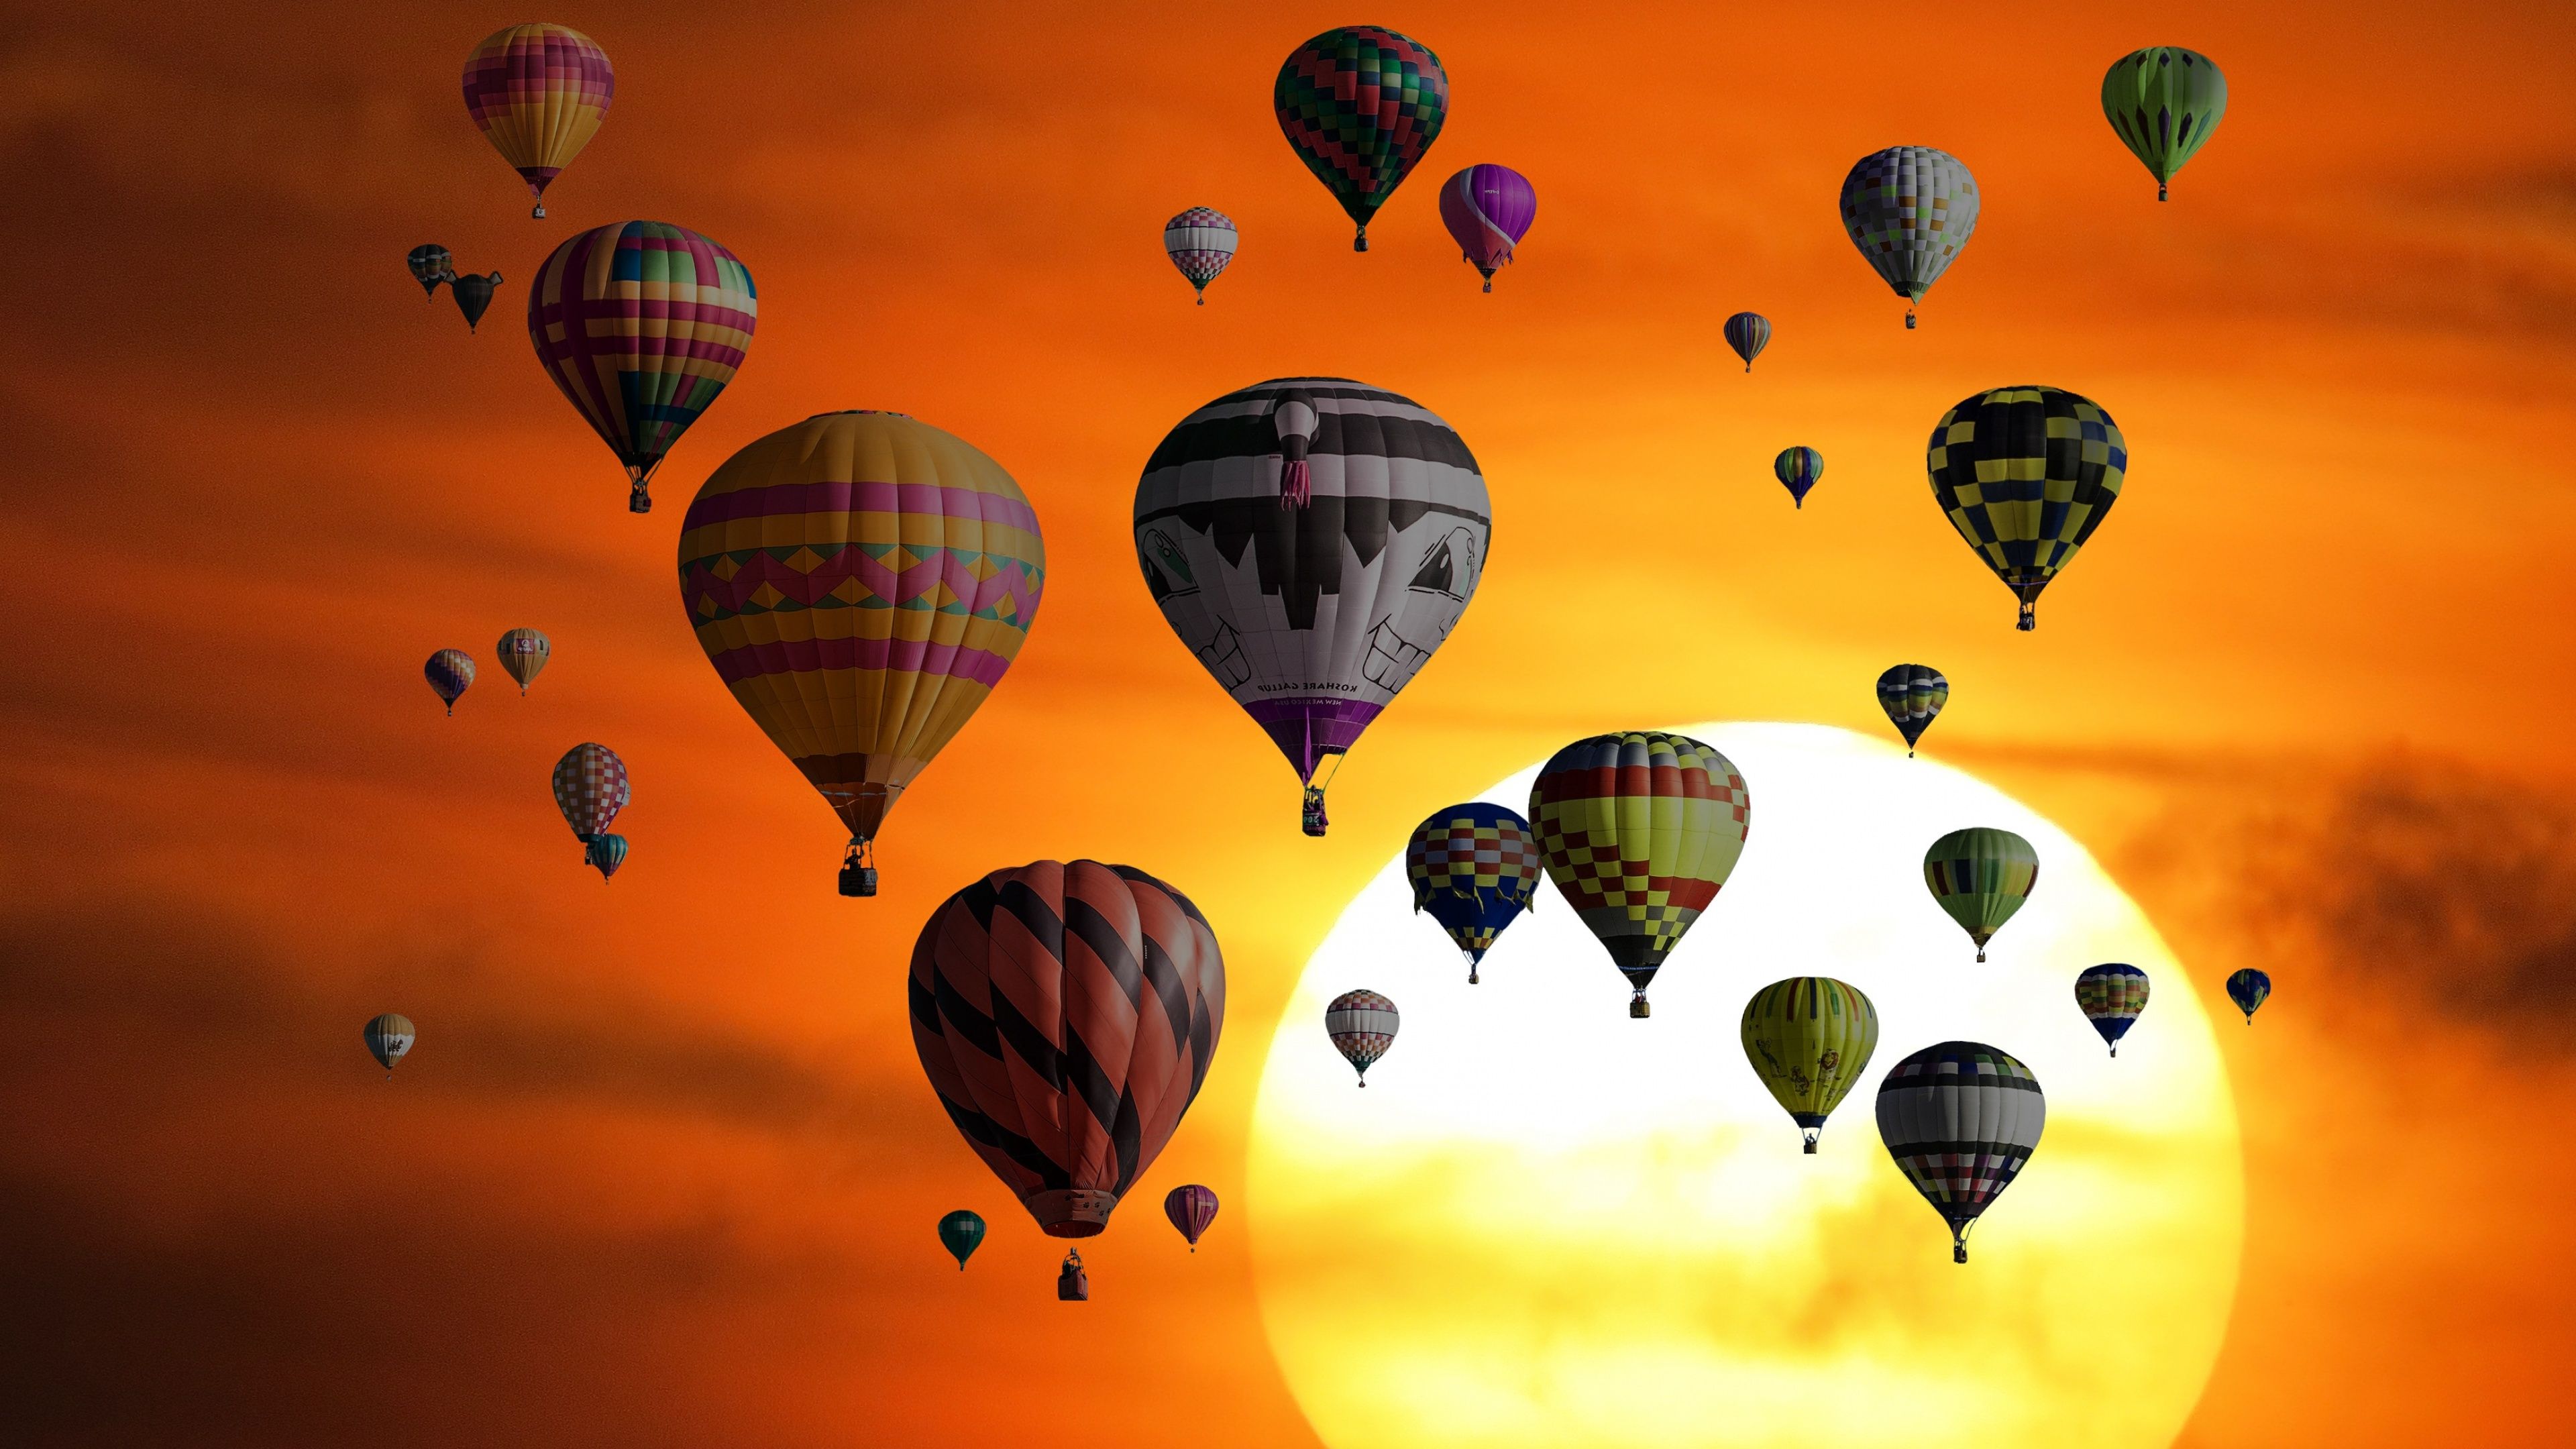 A group of hot air balloons flying in the sky - Hot air balloons, balloons